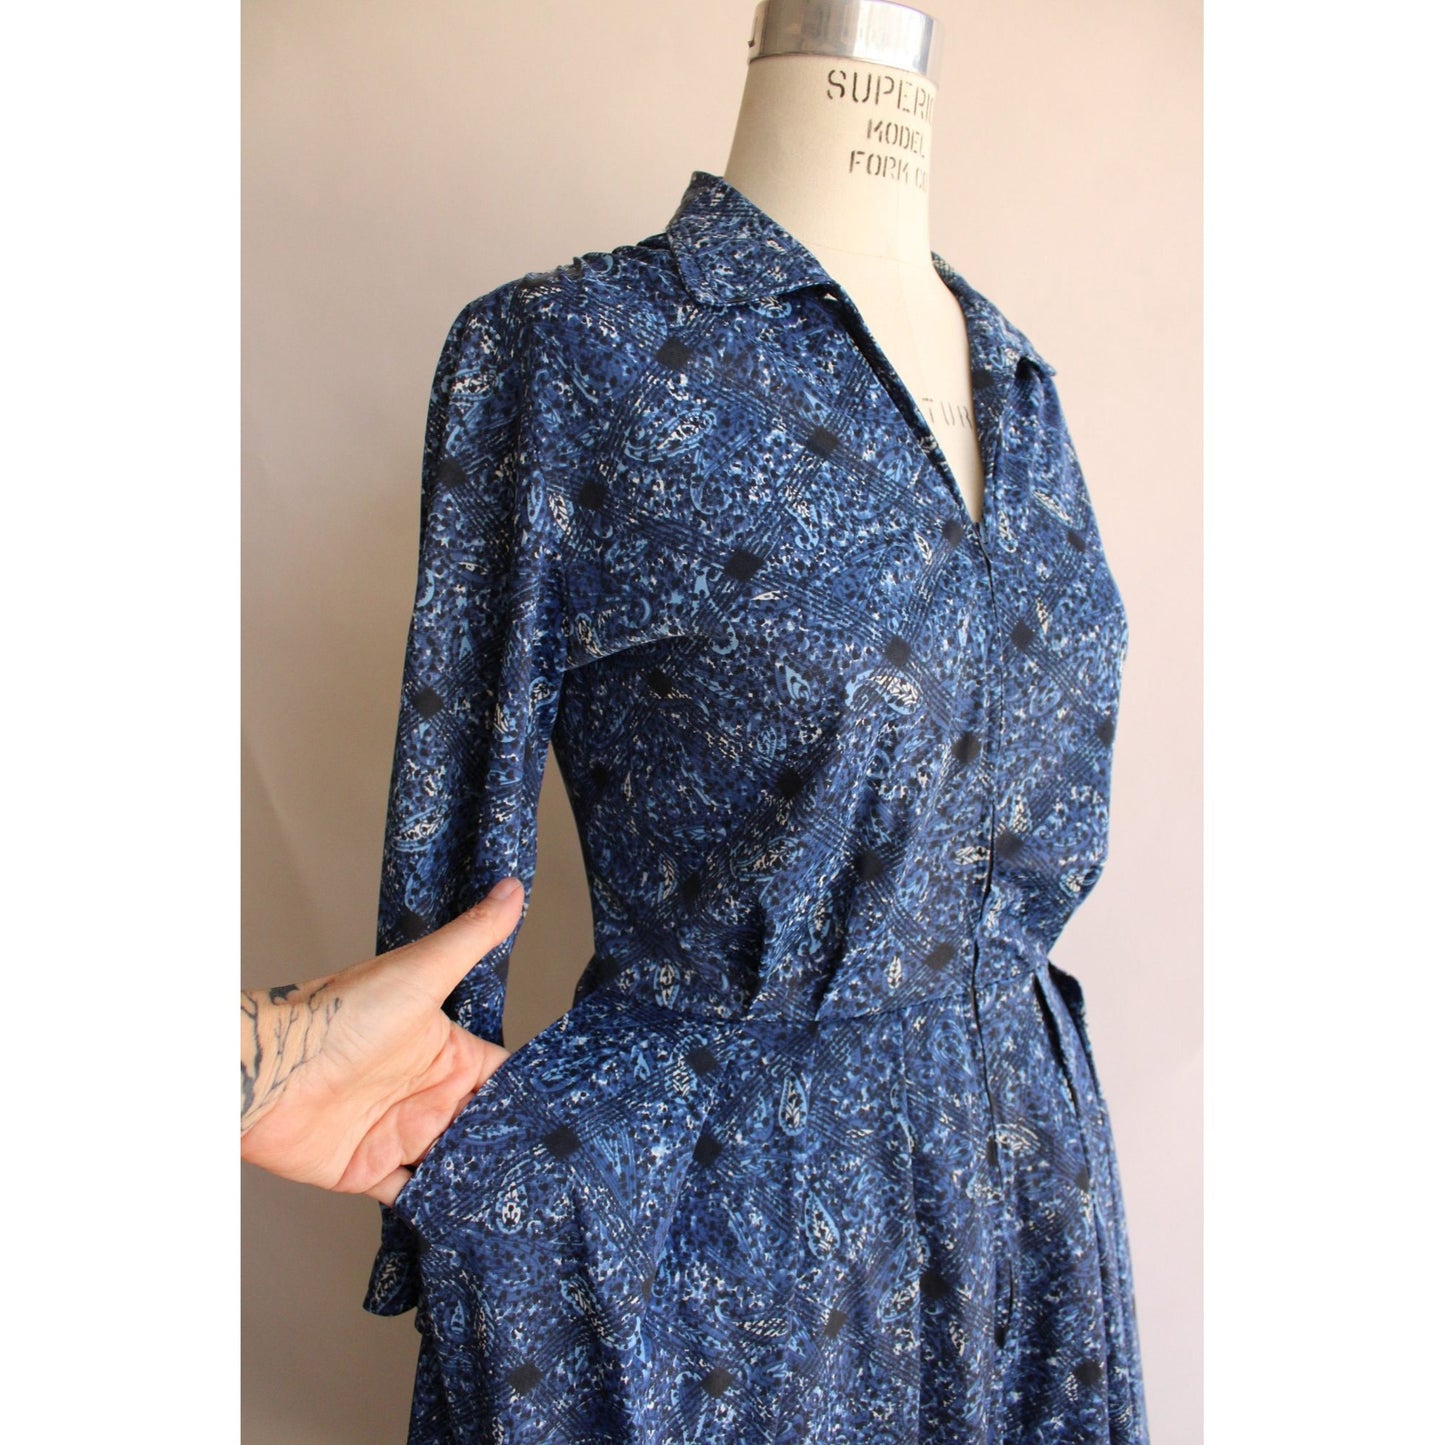 Vintage 1950s Dress With Pockets In a Blue Paisley Print